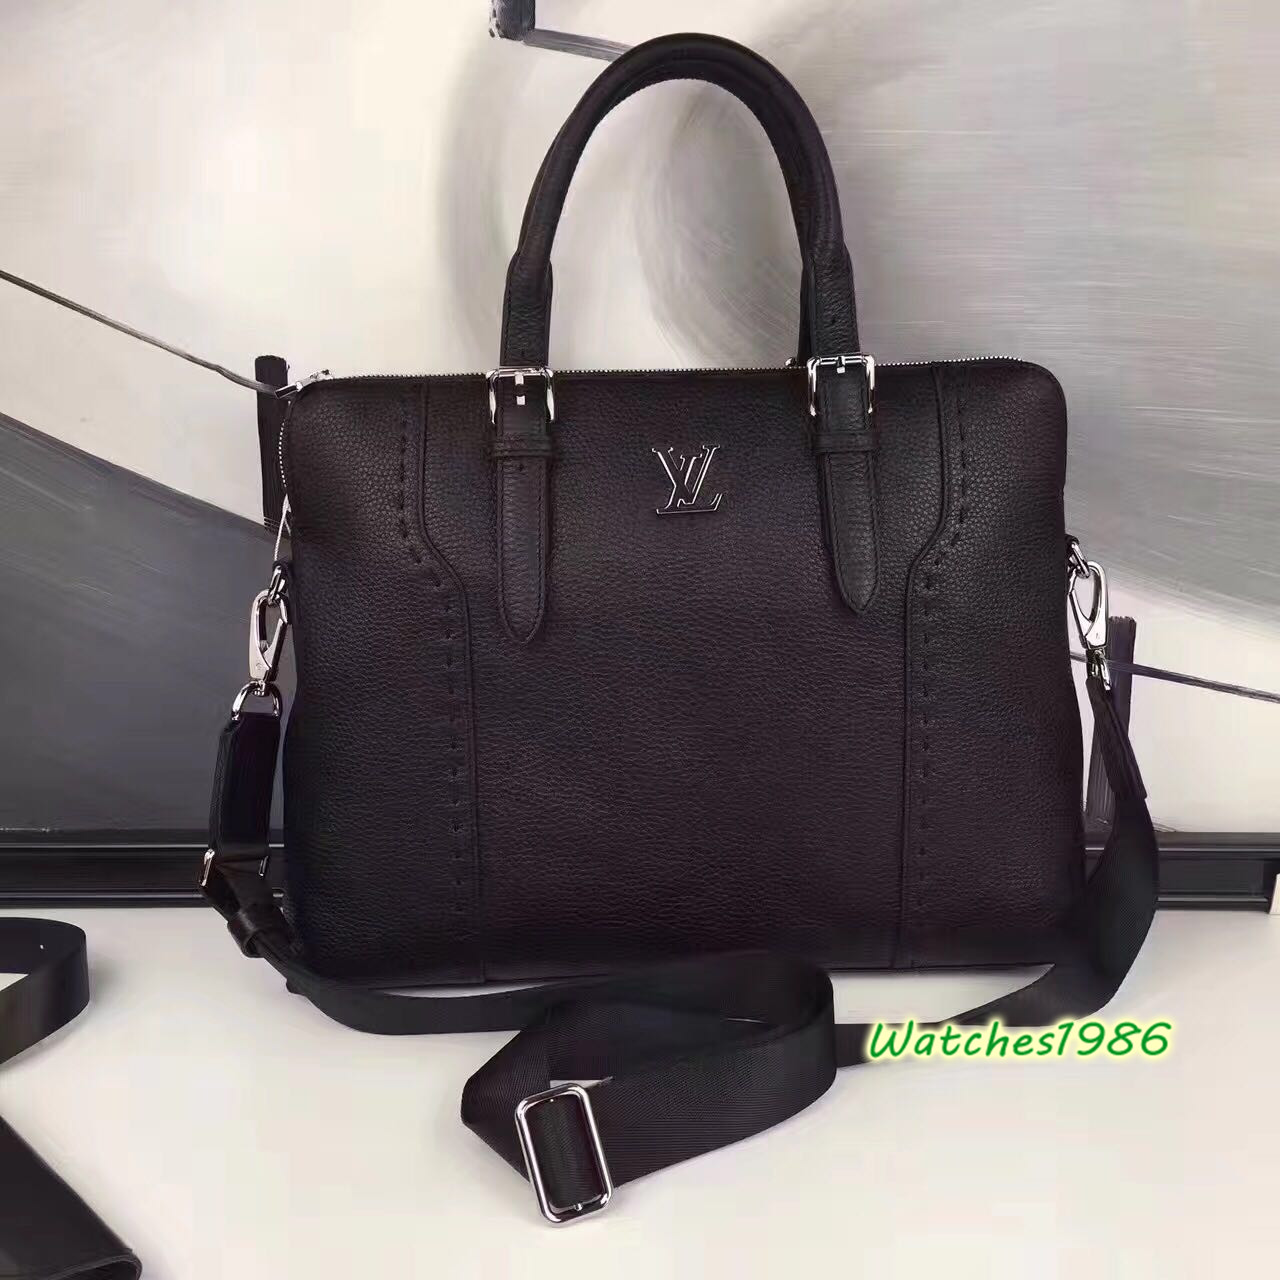 Buy Cheap Louis Vuitton Handbags AAA 1:1 Quality #9999926713 from